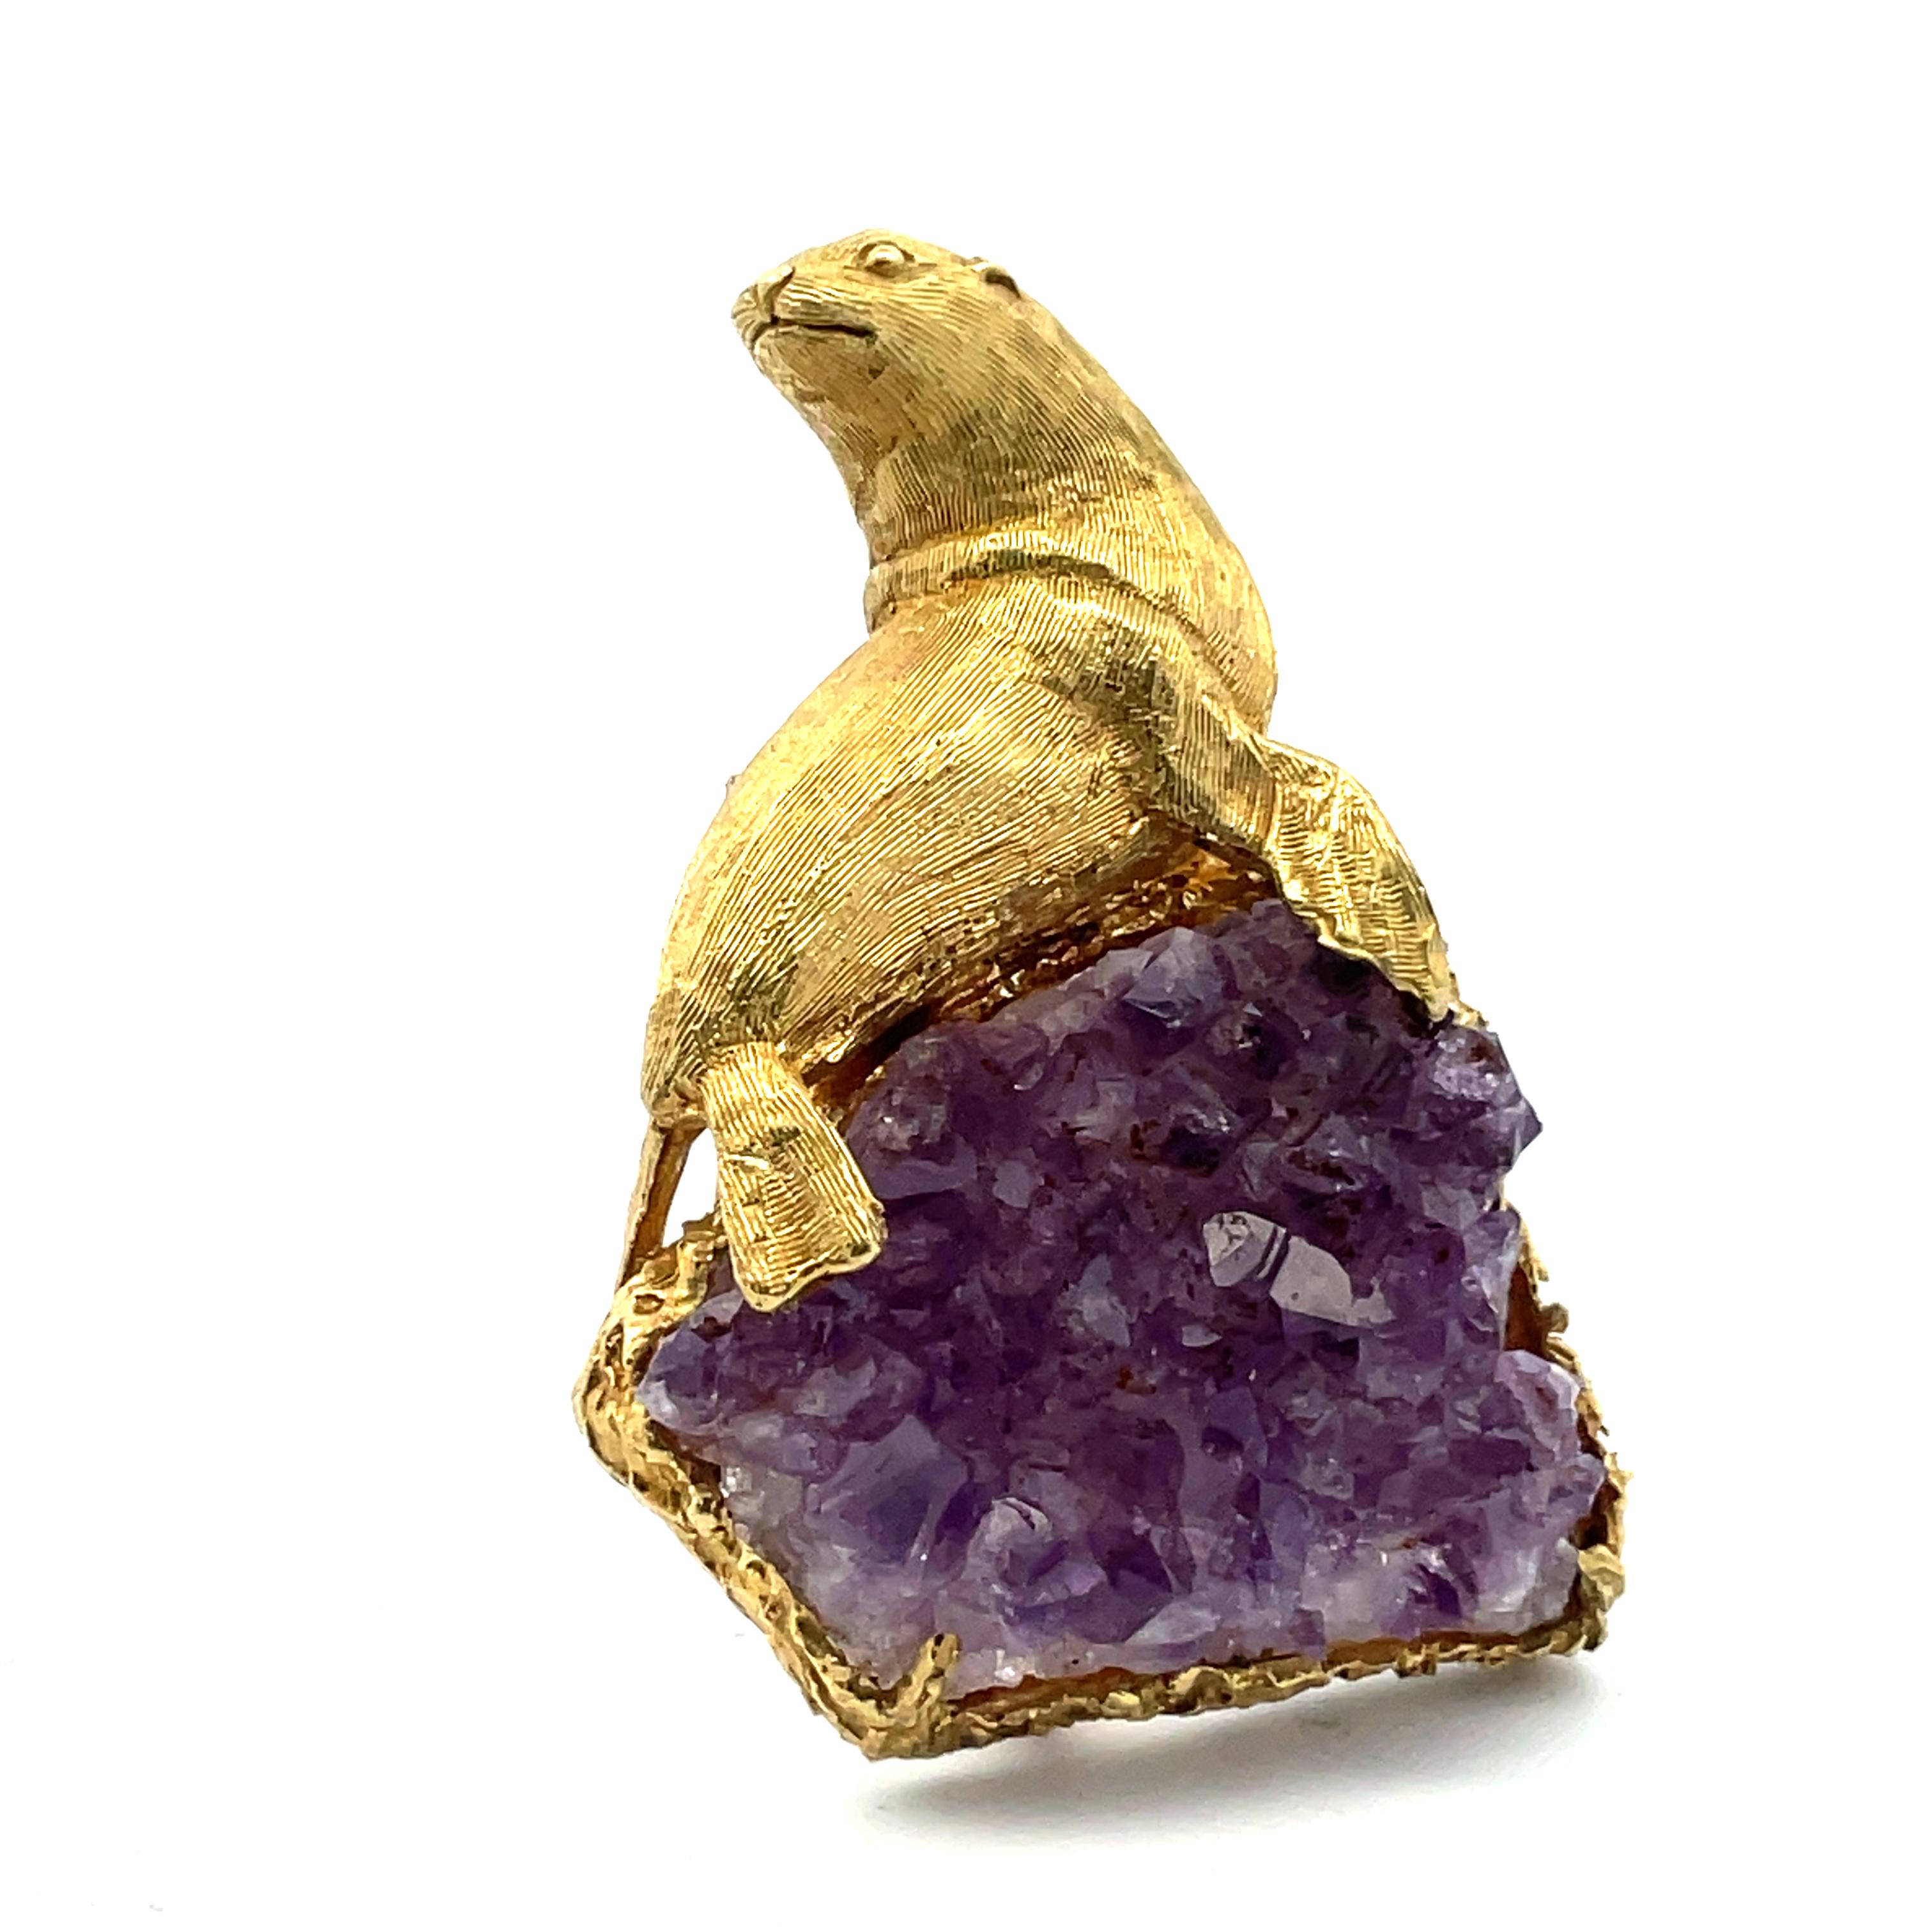 The bold design of the 1970's is manifest in Boris LeBeau's 18K gold brooch with sculpted seal perched on an amethyst drusy crystal.  The brooch measures 1-1/2